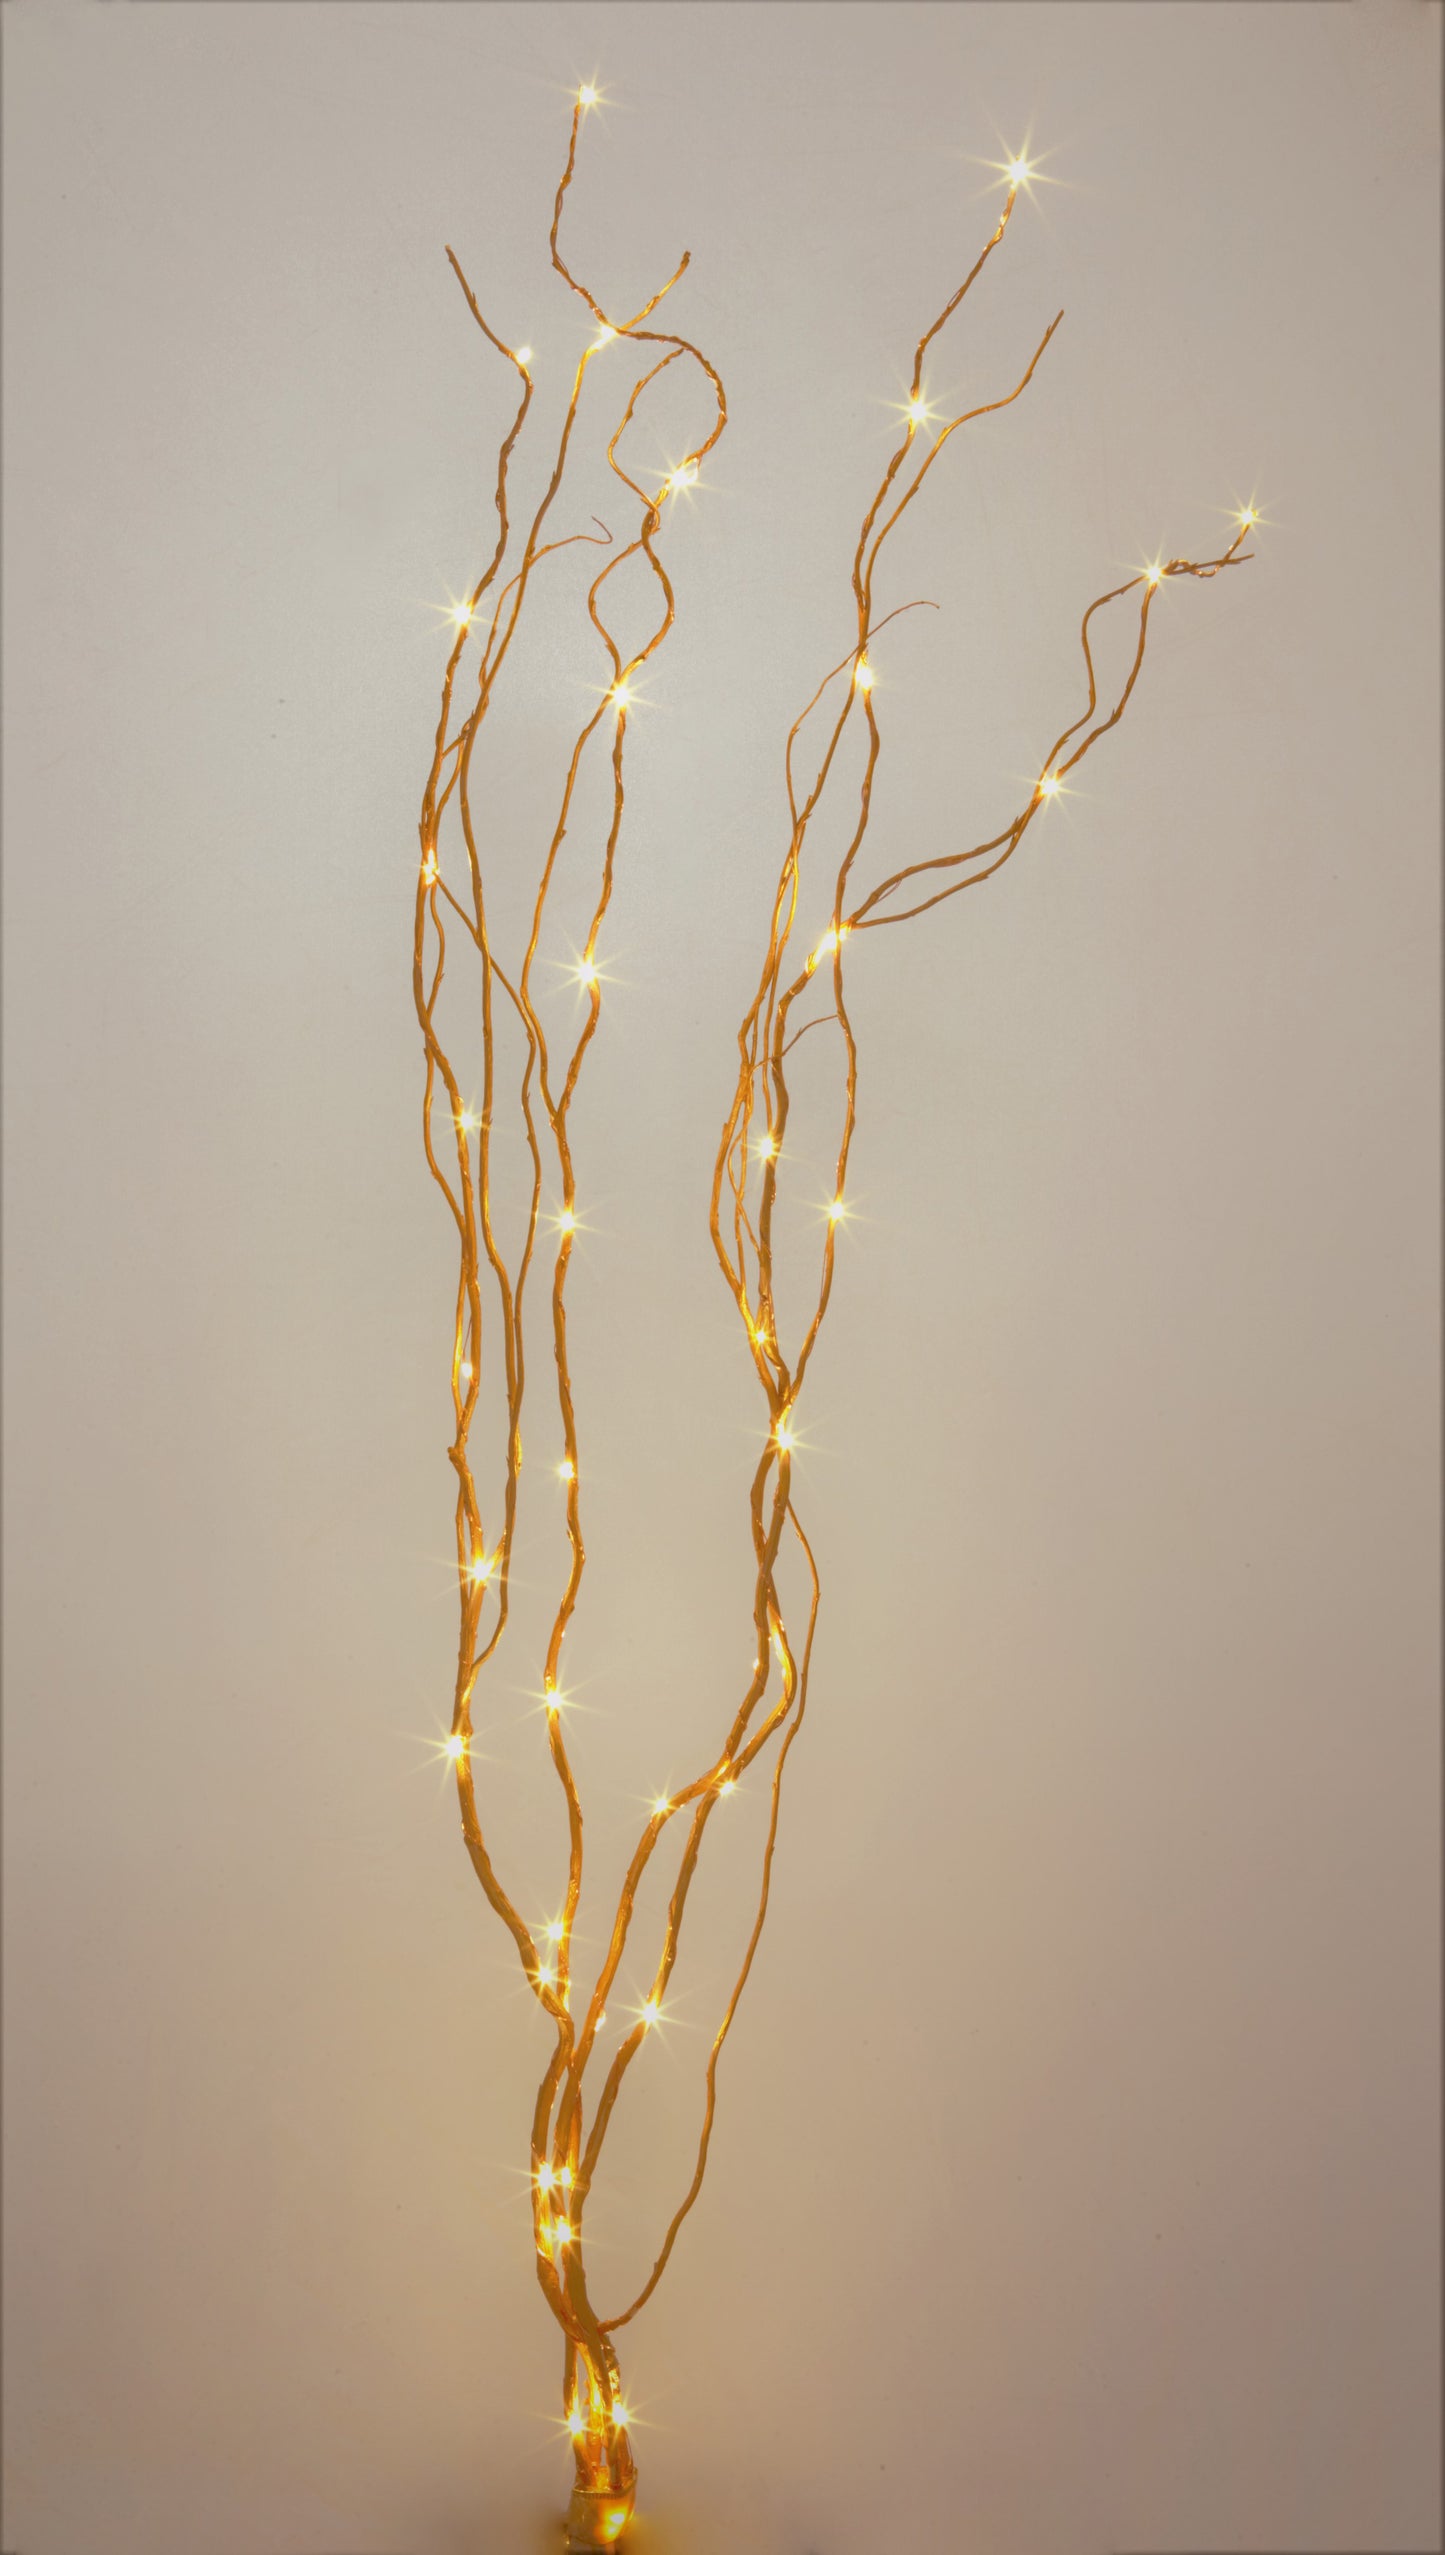 48" LED Lighted Gold Curly Willow Branches Plug in /Remote control